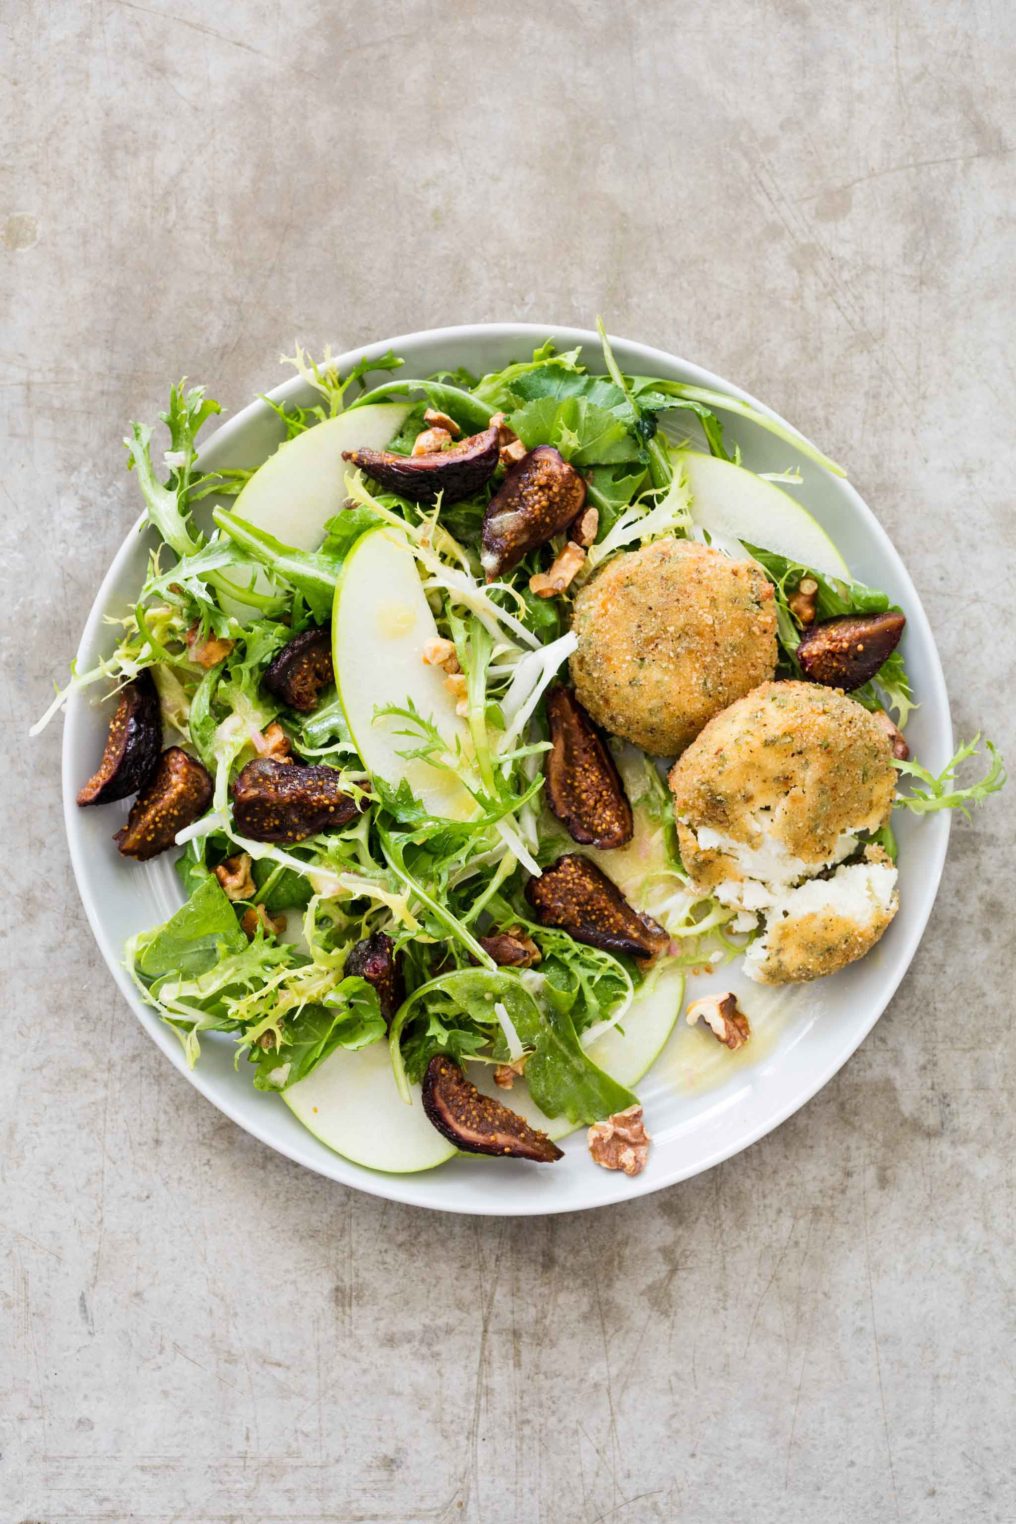 Salad with Apples Walnuts Figs and Herbed Baked Goat Cheese